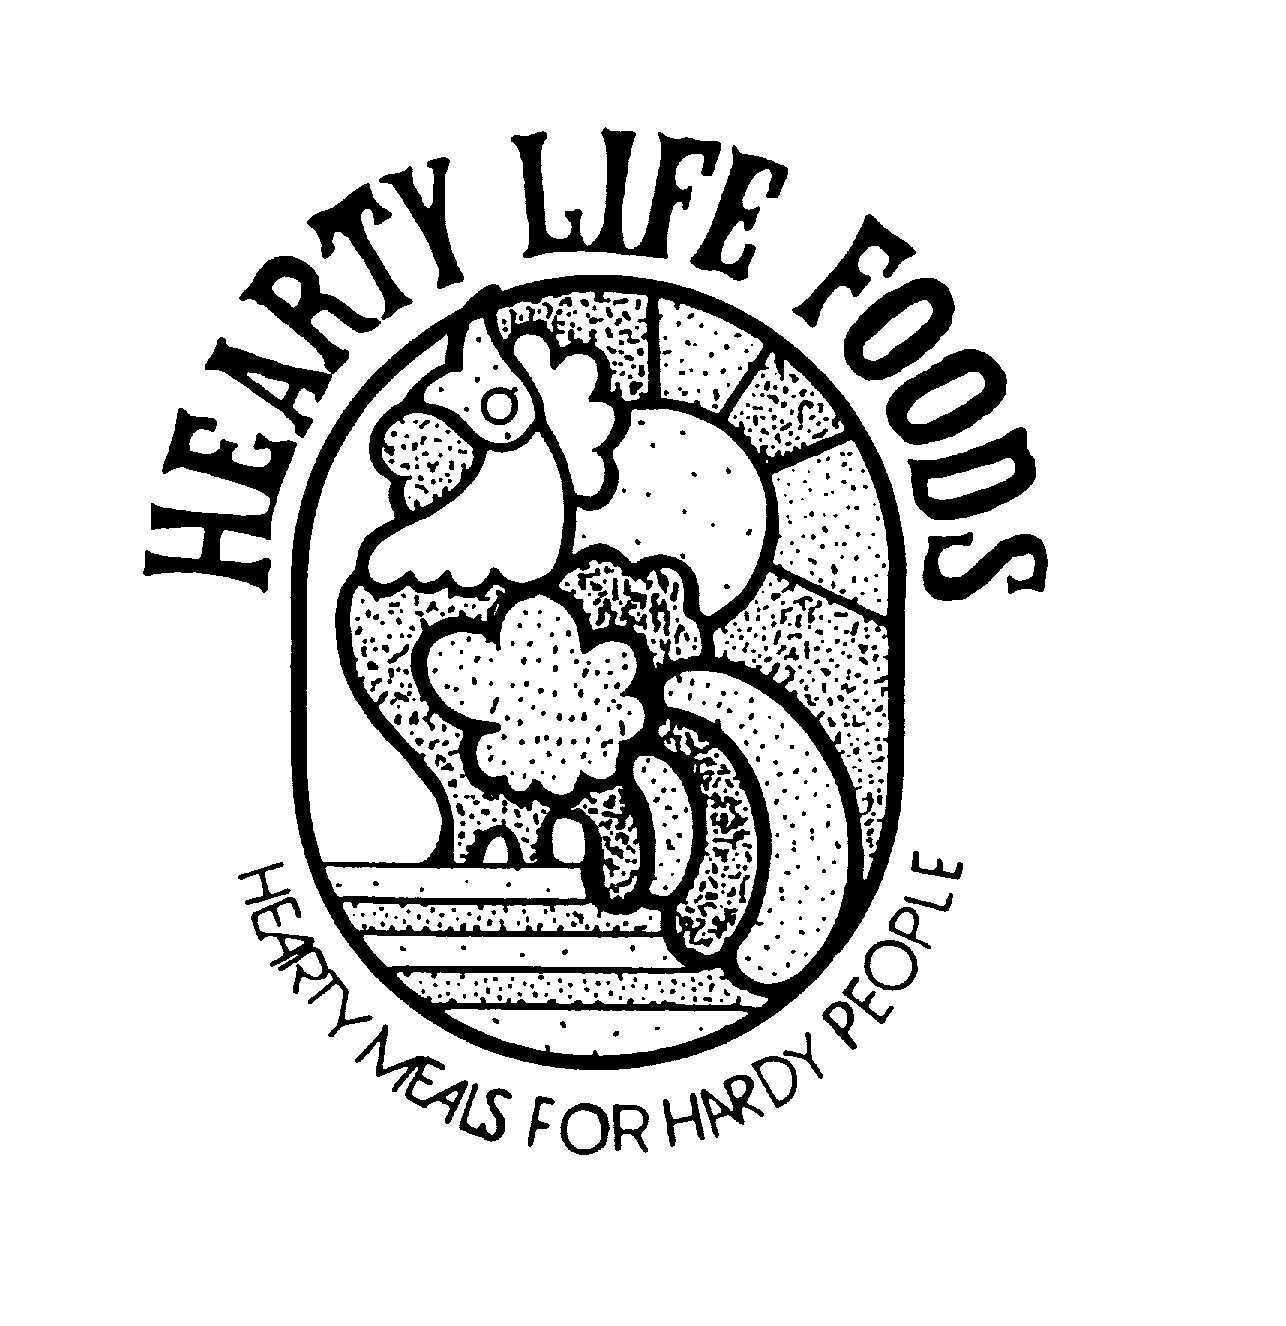  HEARTY LIFE FOODS HEARTY MEALS FOR HARDY PEOPLE